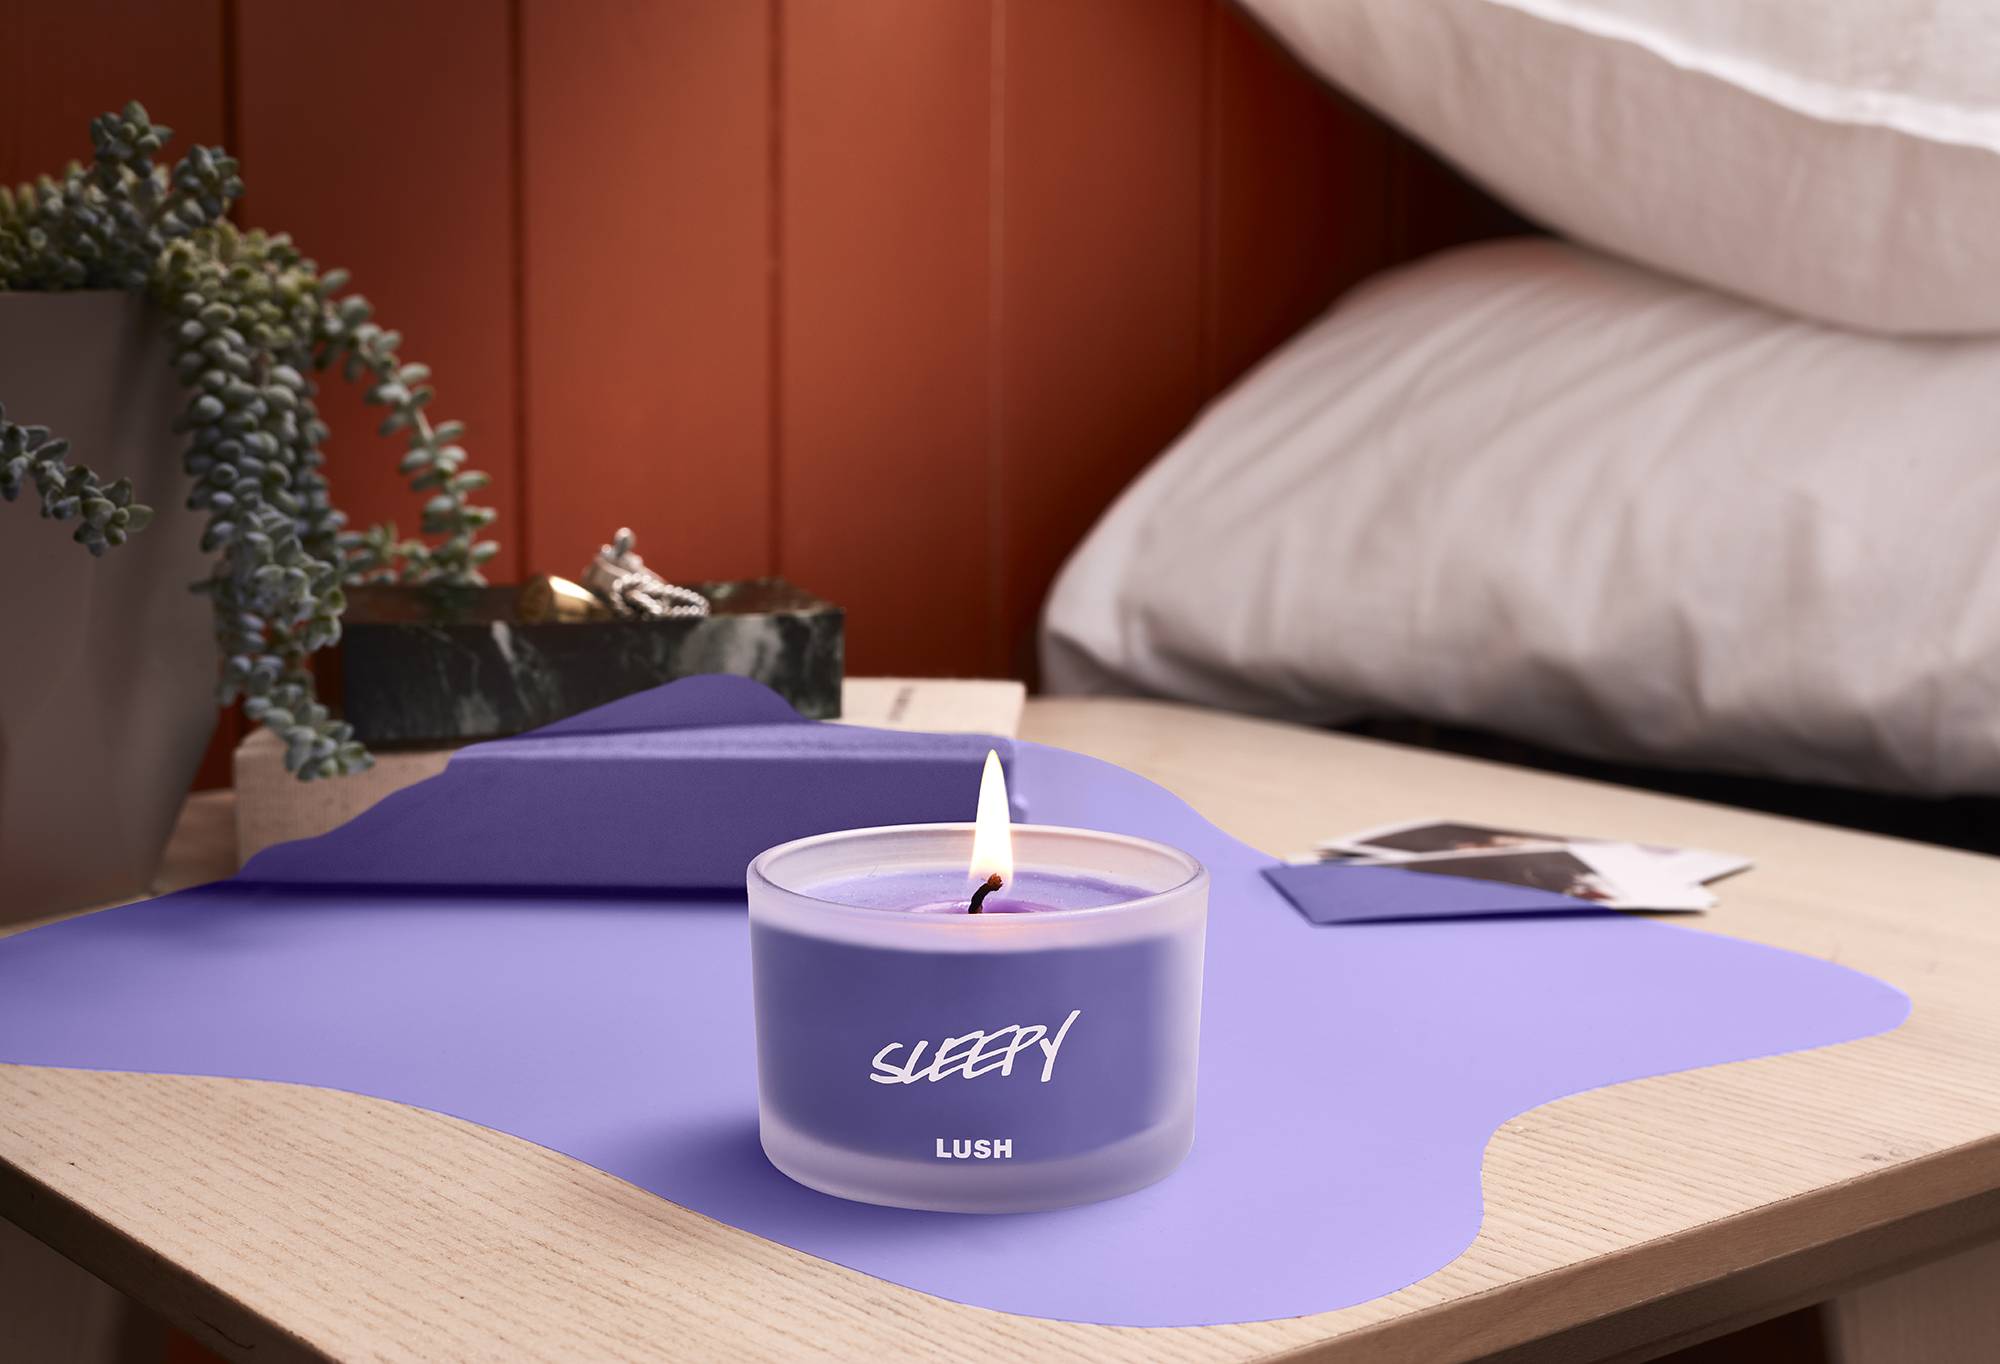 The candle is shown on a wooden bedside table, that's partly coloured the same shade of purple as the candle's wax.